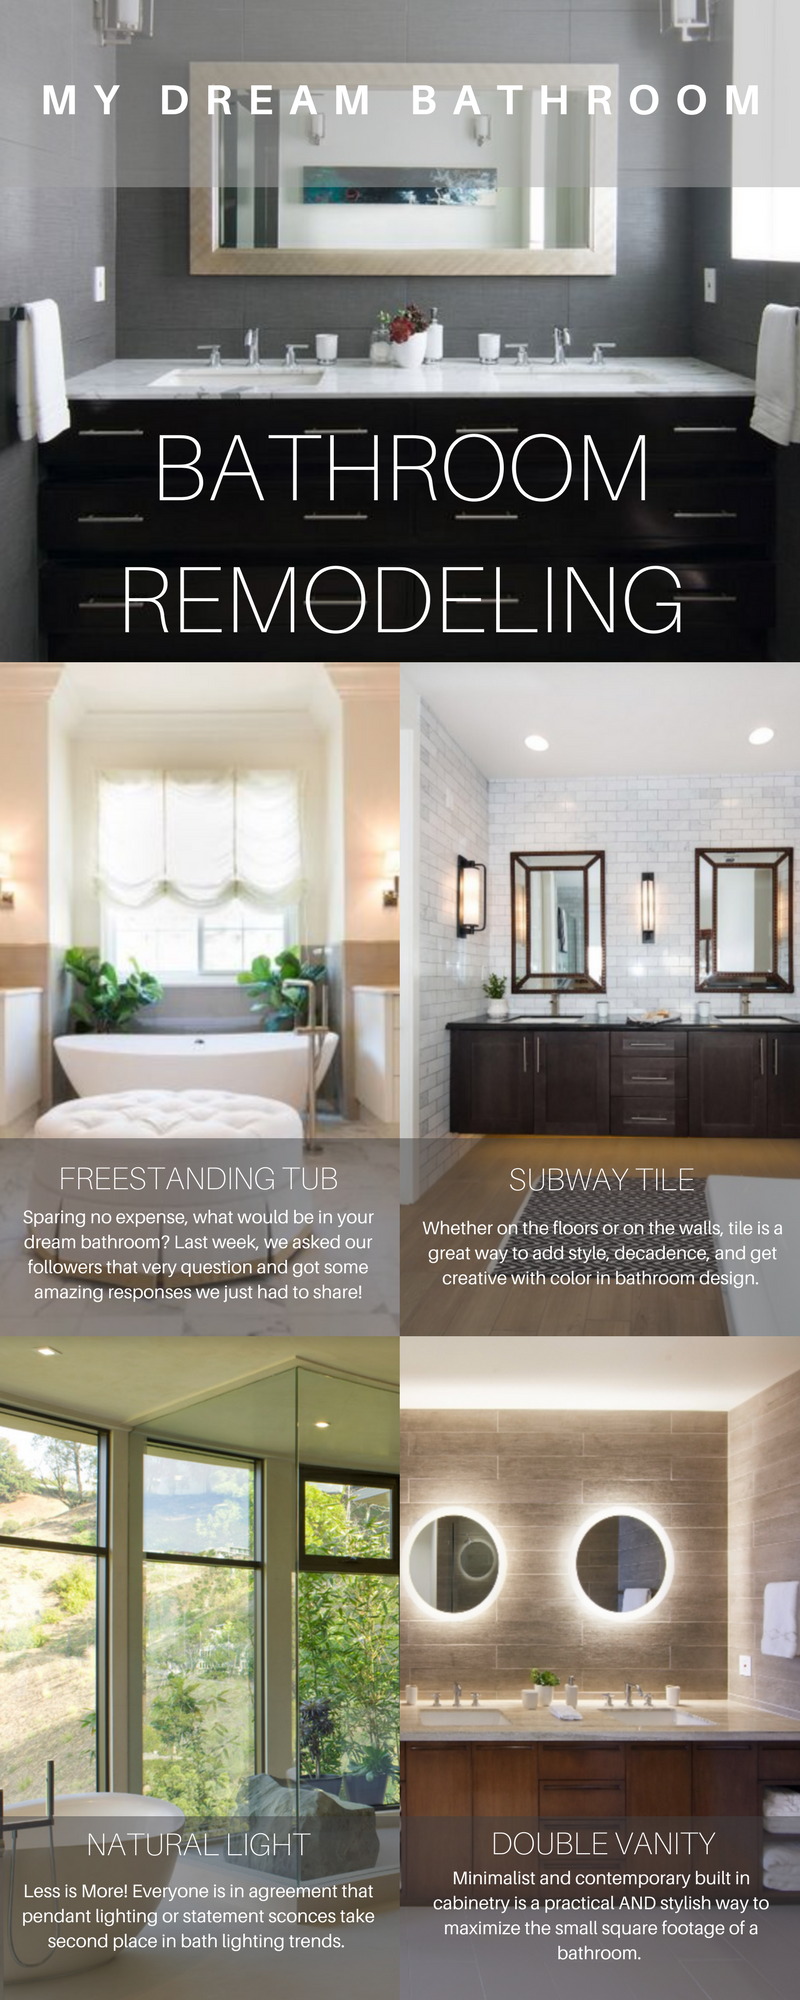 Sparing no expense, what would be in your dream bathroom? Last week, we asked our followers that very question and got some amazing responses we just had to share! Read on for the top amenities our followers want in their dream bathroom makeover